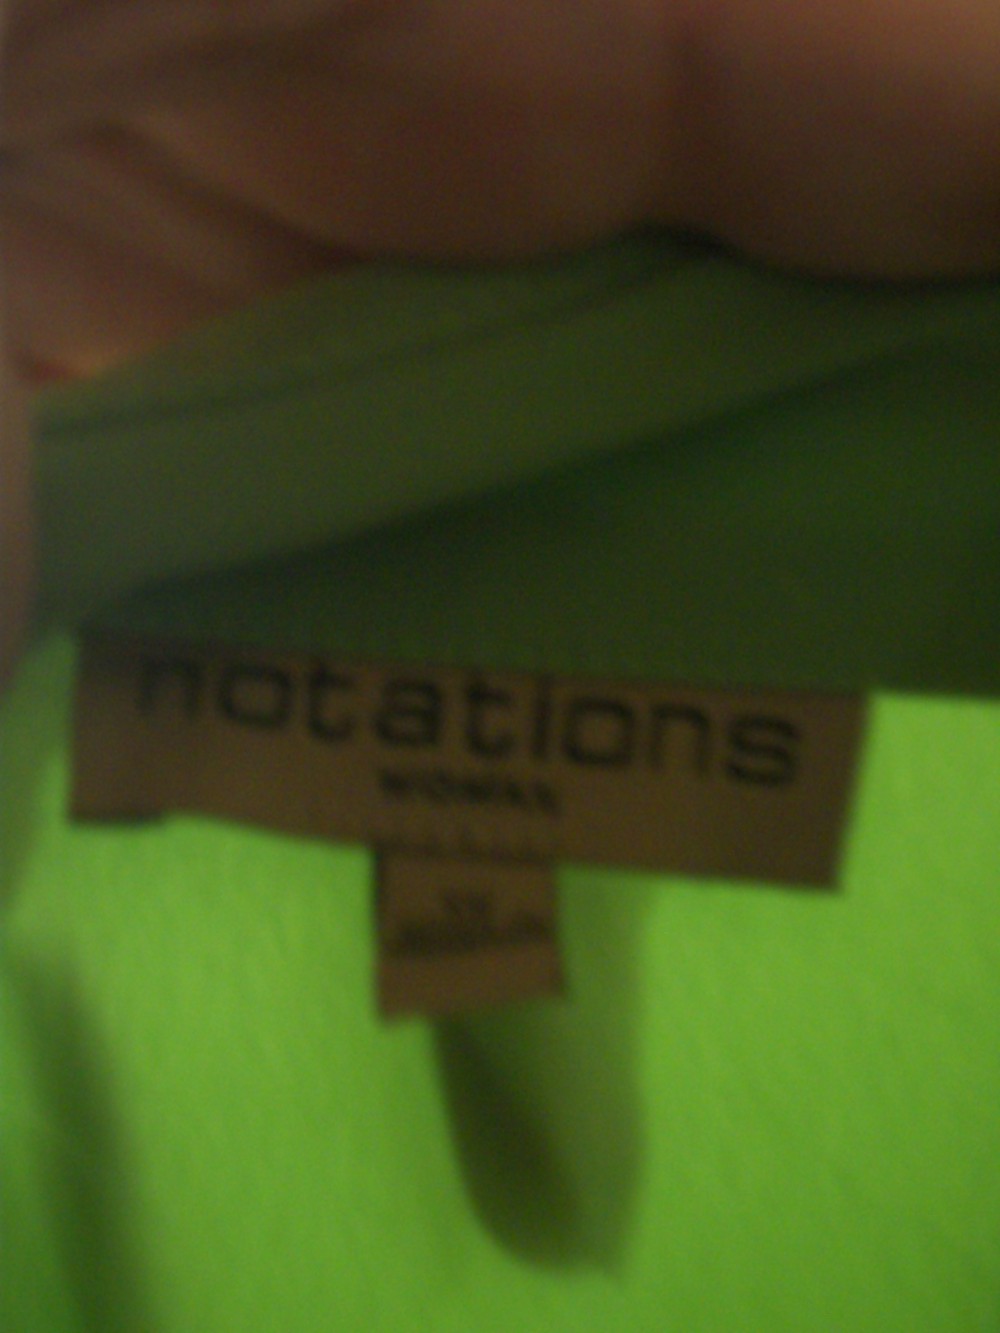 Im jacking off for notations blouse colors #20173408